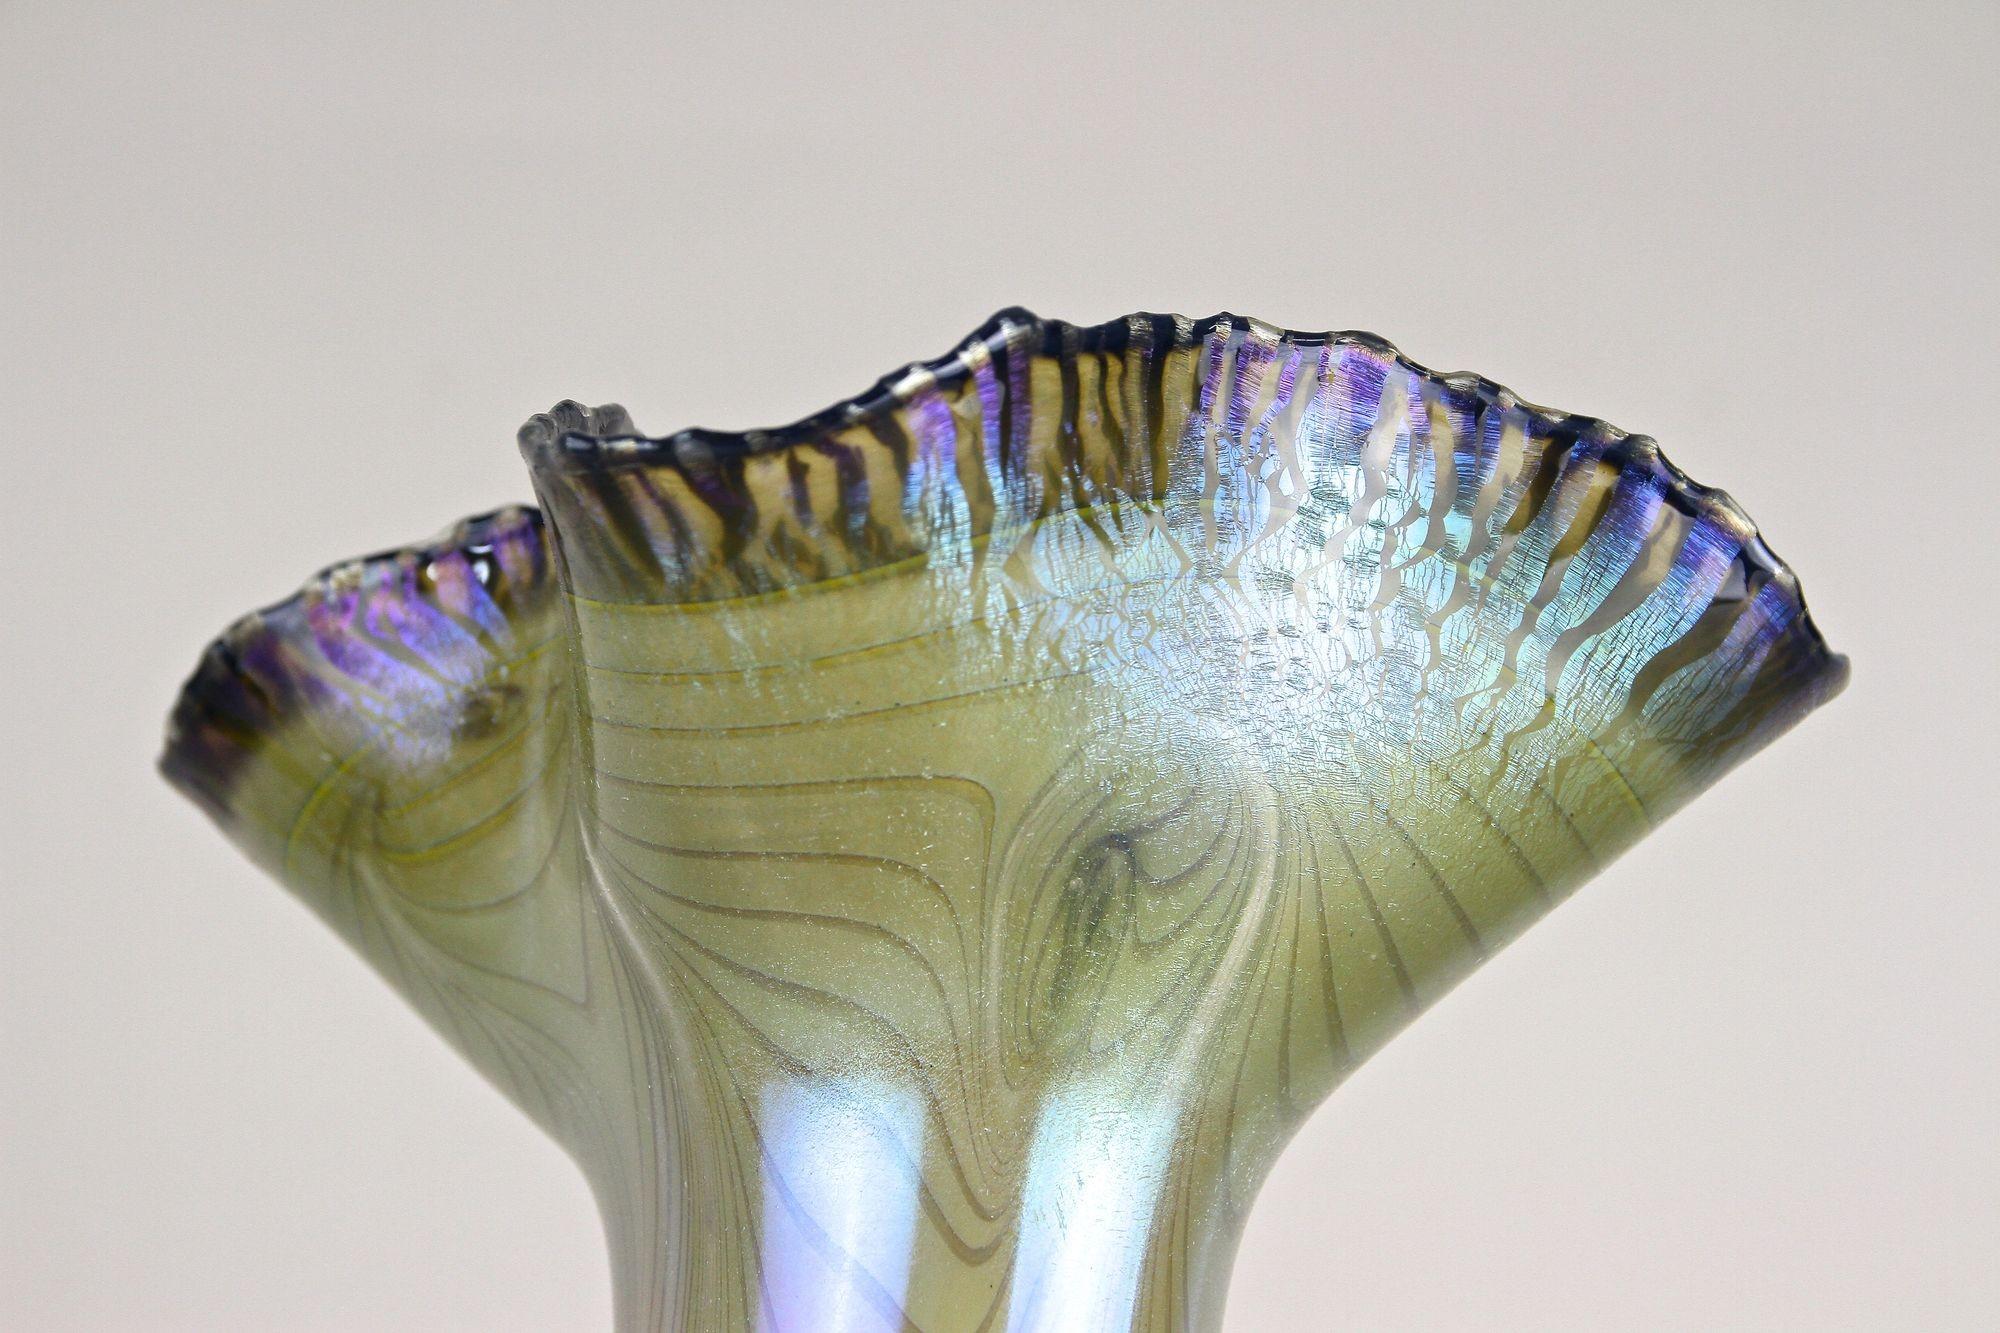 20th Century Iridescent Glass Vase by E. Eisch - Signed, Germany 1982 For Sale 6